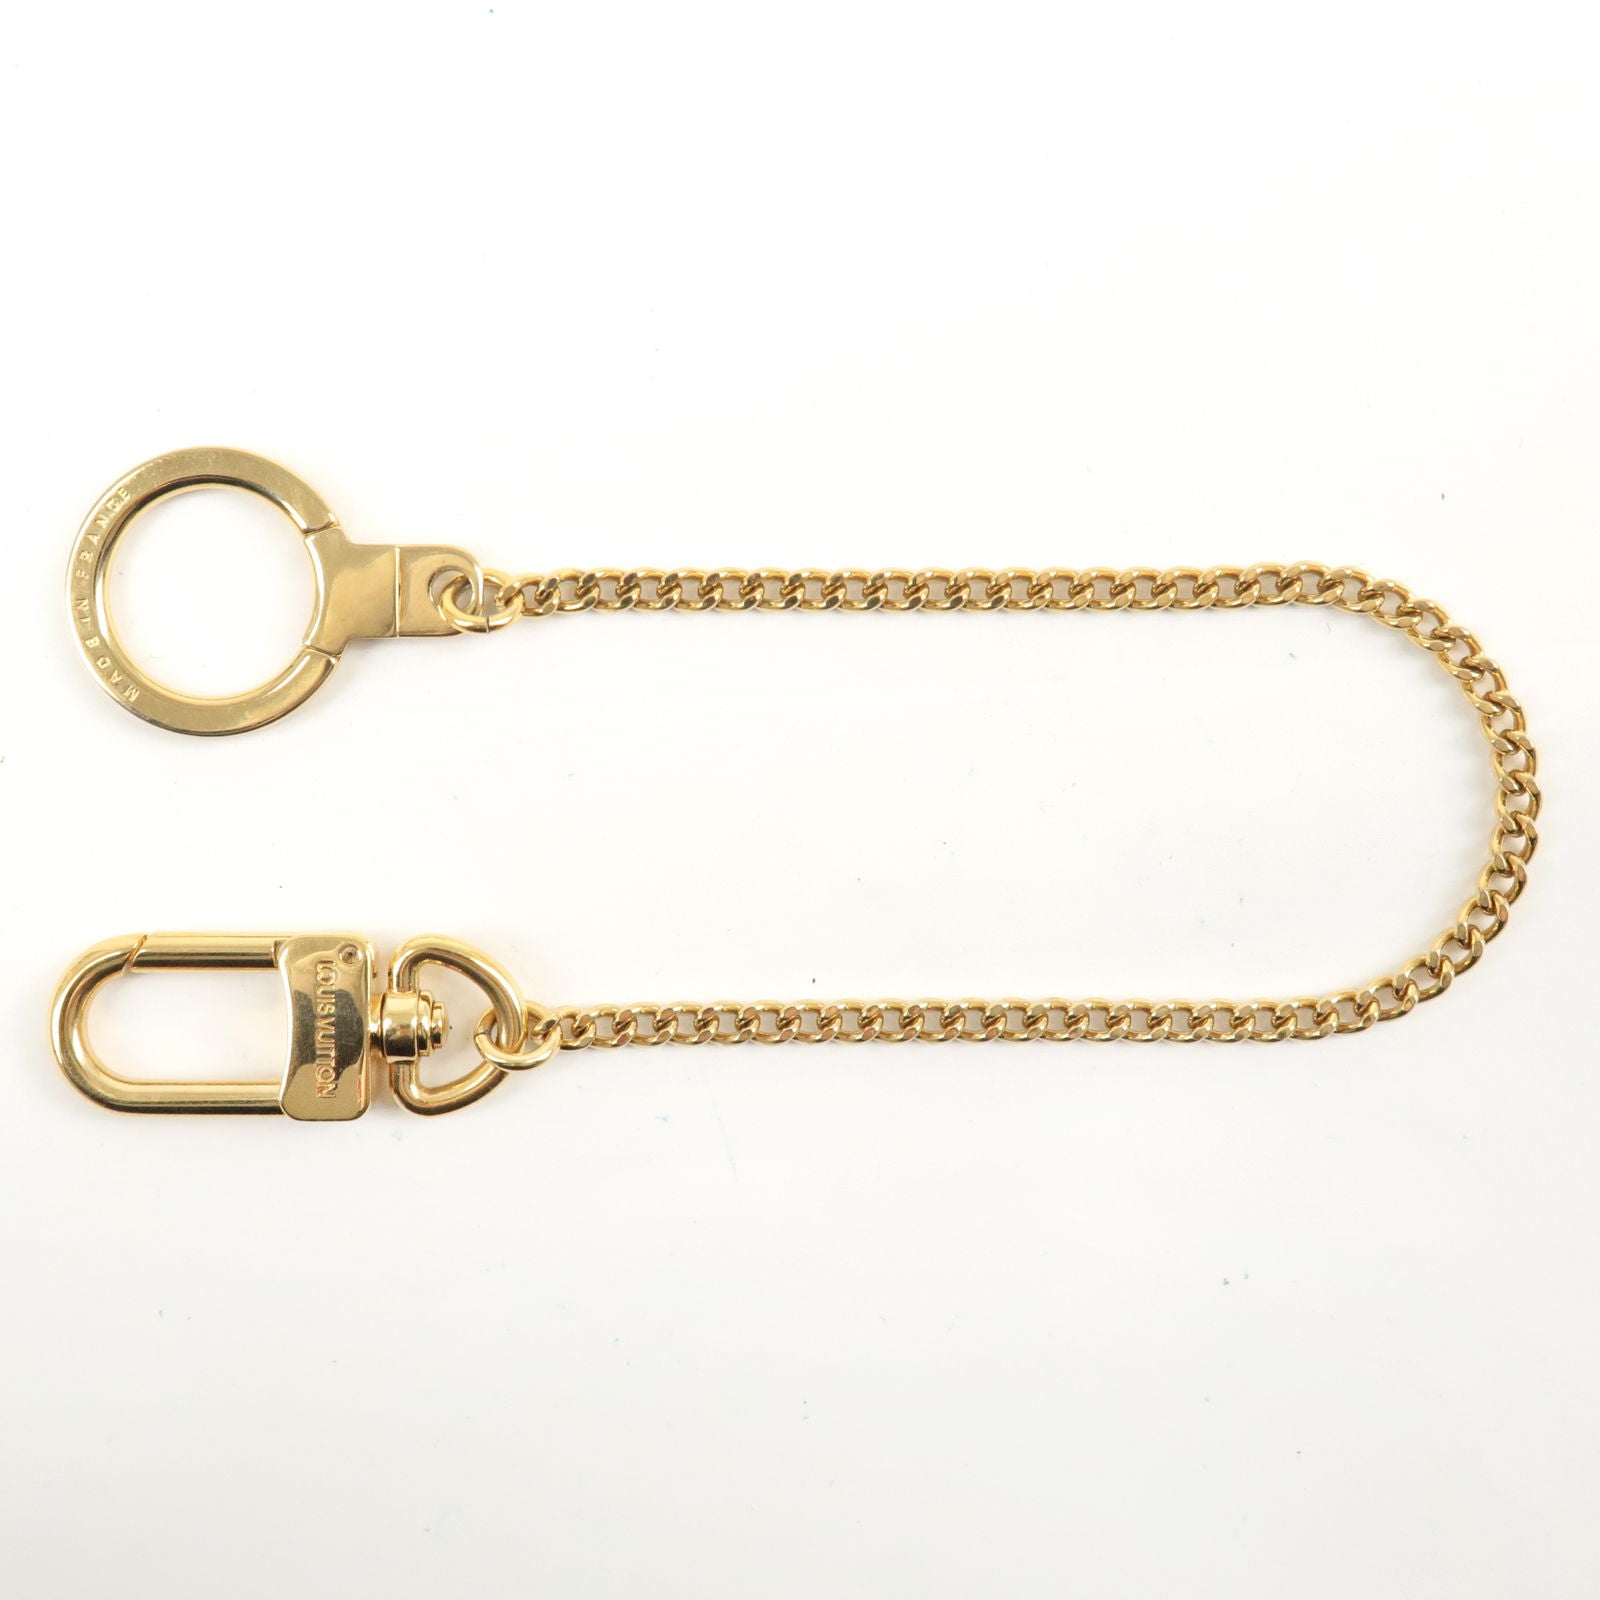 Louis-Vuitton-Chenne-Ano-Cles-Key-Chain-Key-Charm-Gold-M58021 –  dct-ep_vintage luxury Store